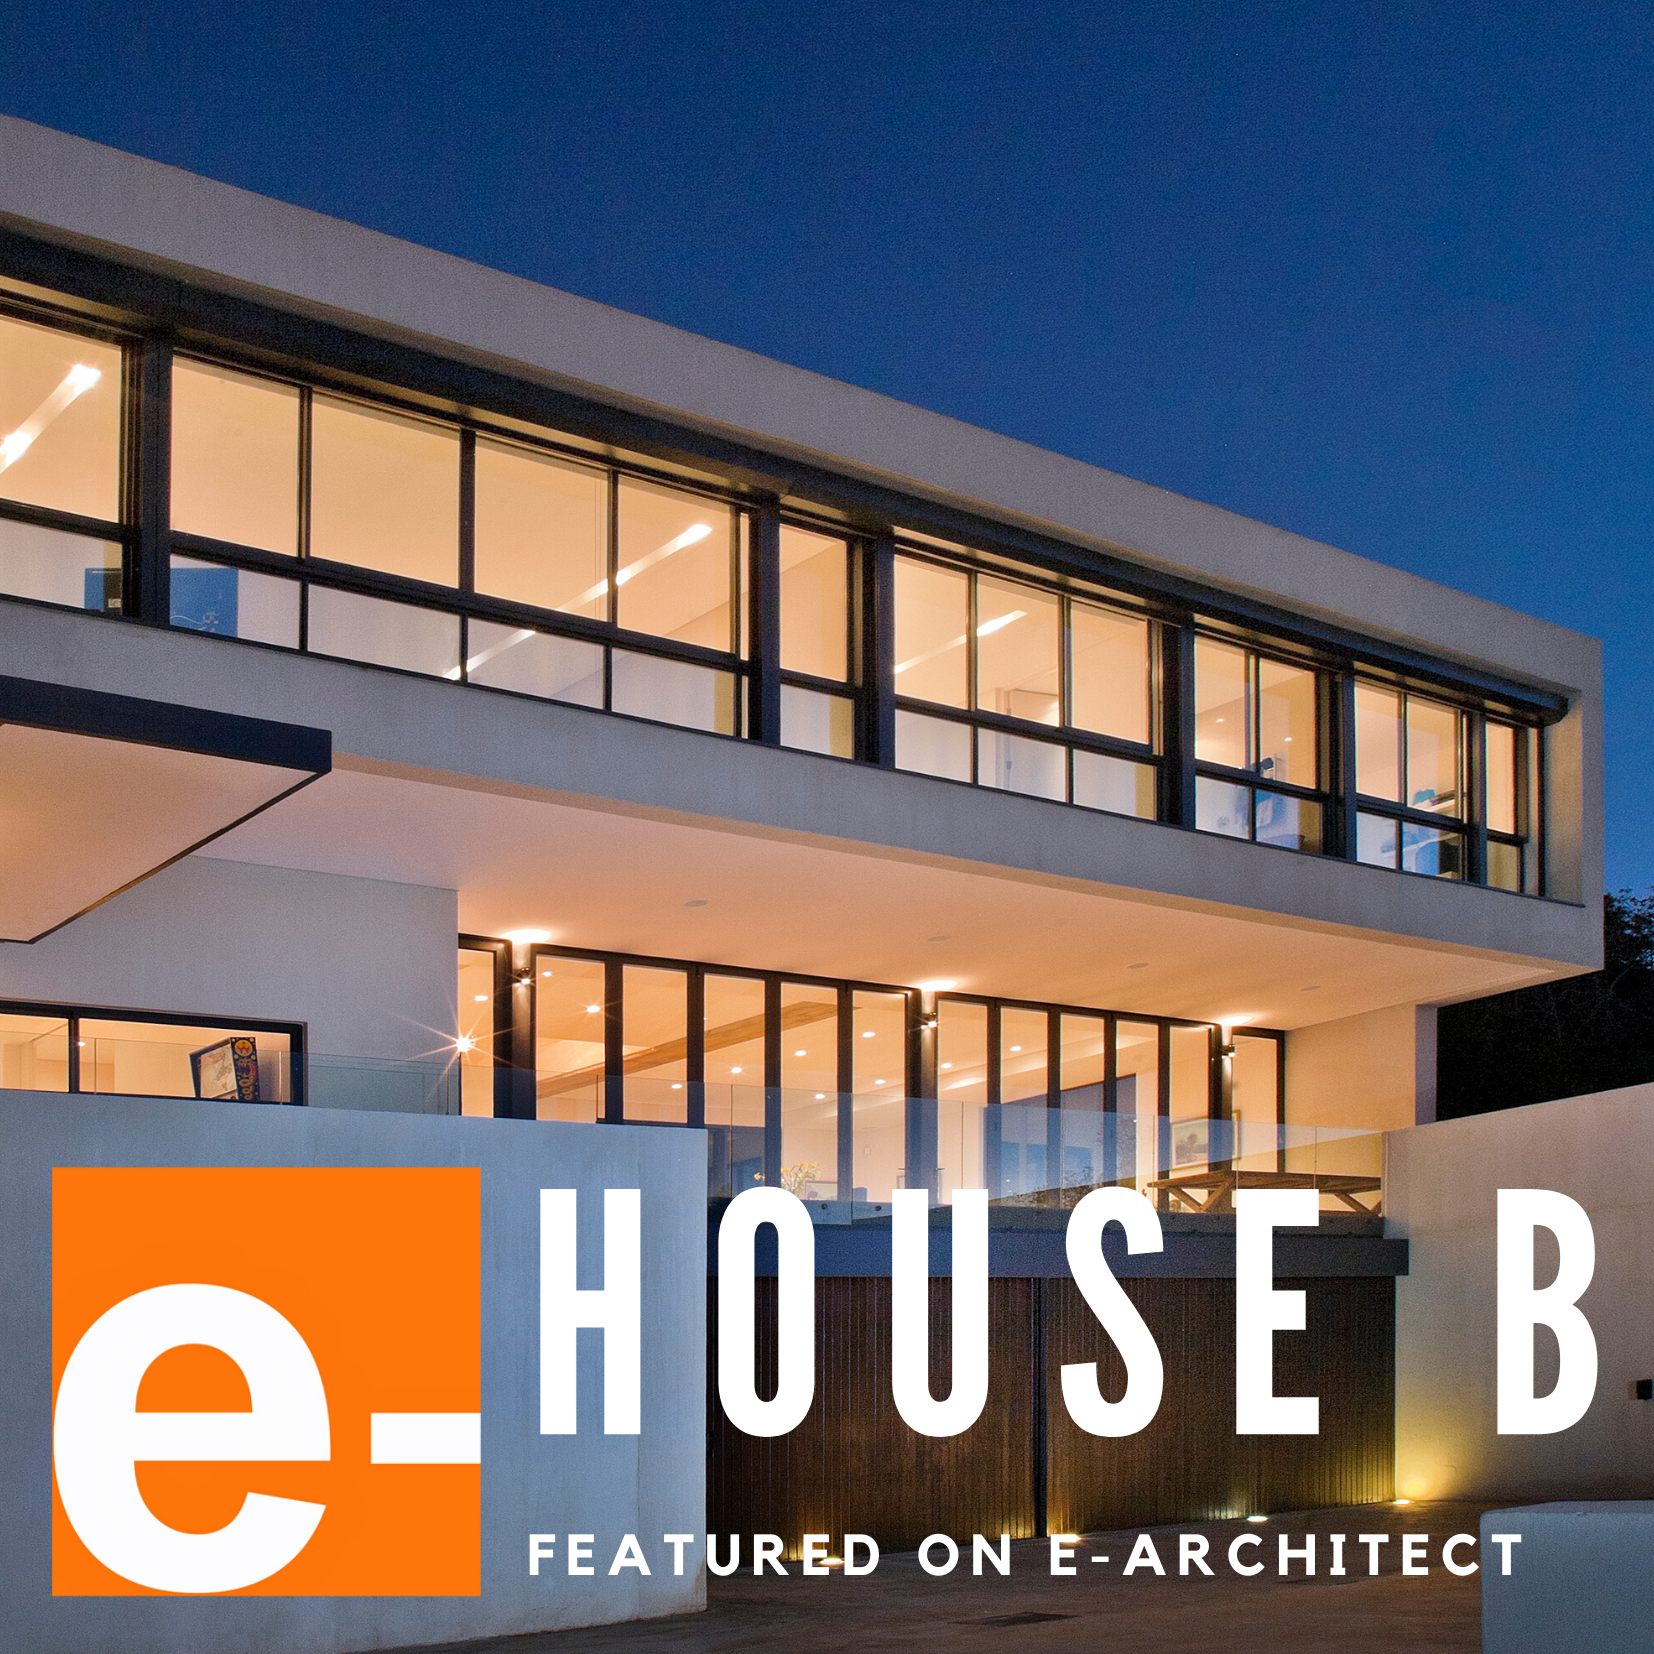 House B, featured on E-Architect